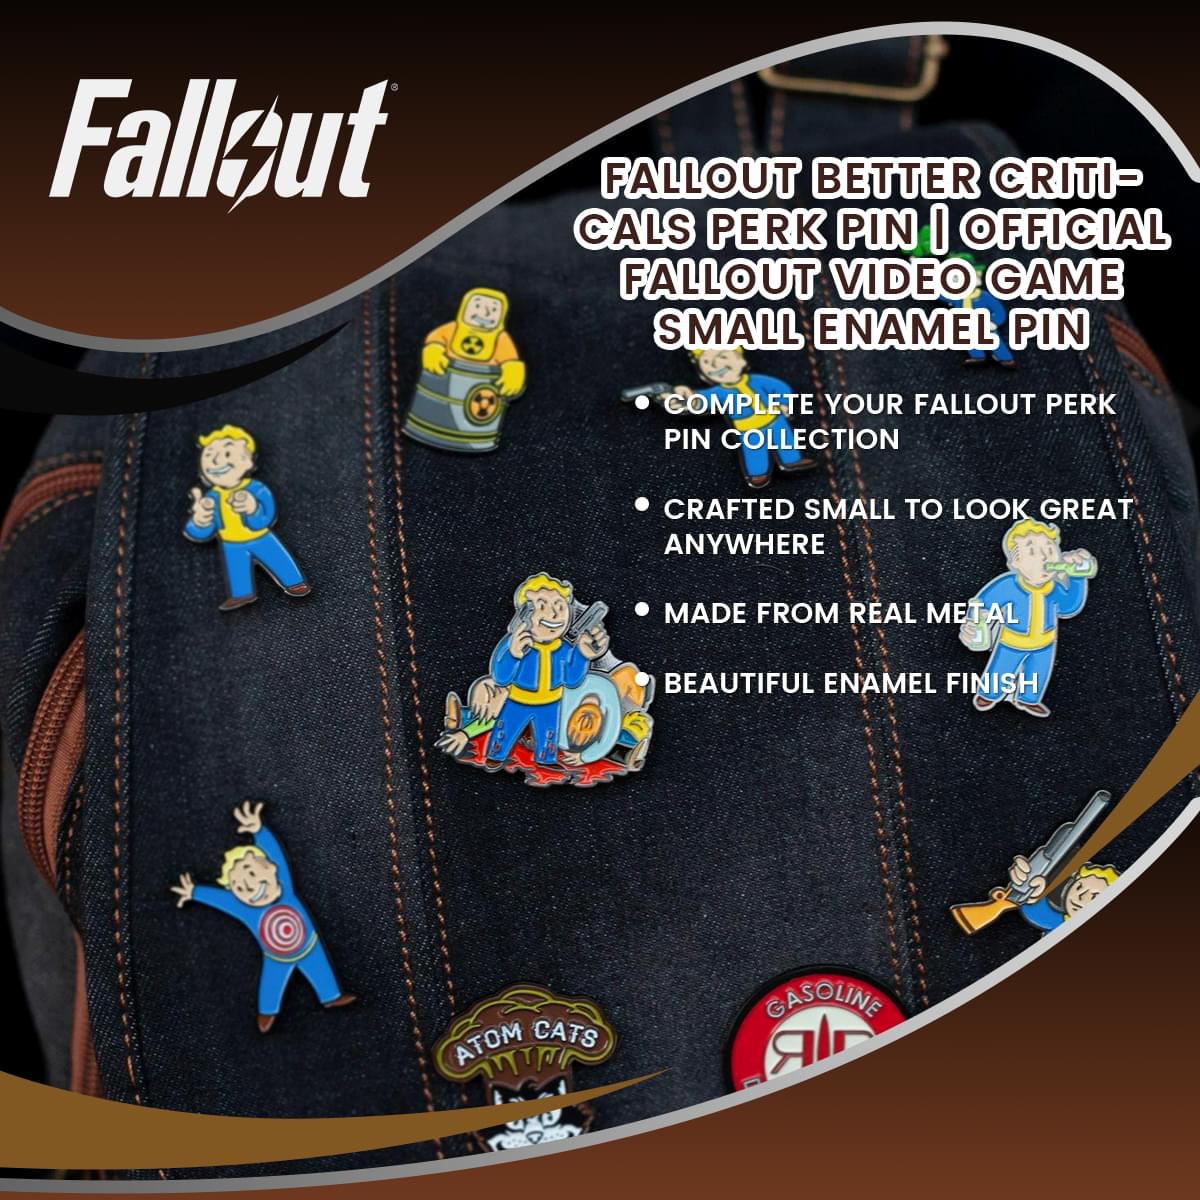 Fallout Better Criticals Perk Pin | Official Fallout Video Game Small Enamel Pin